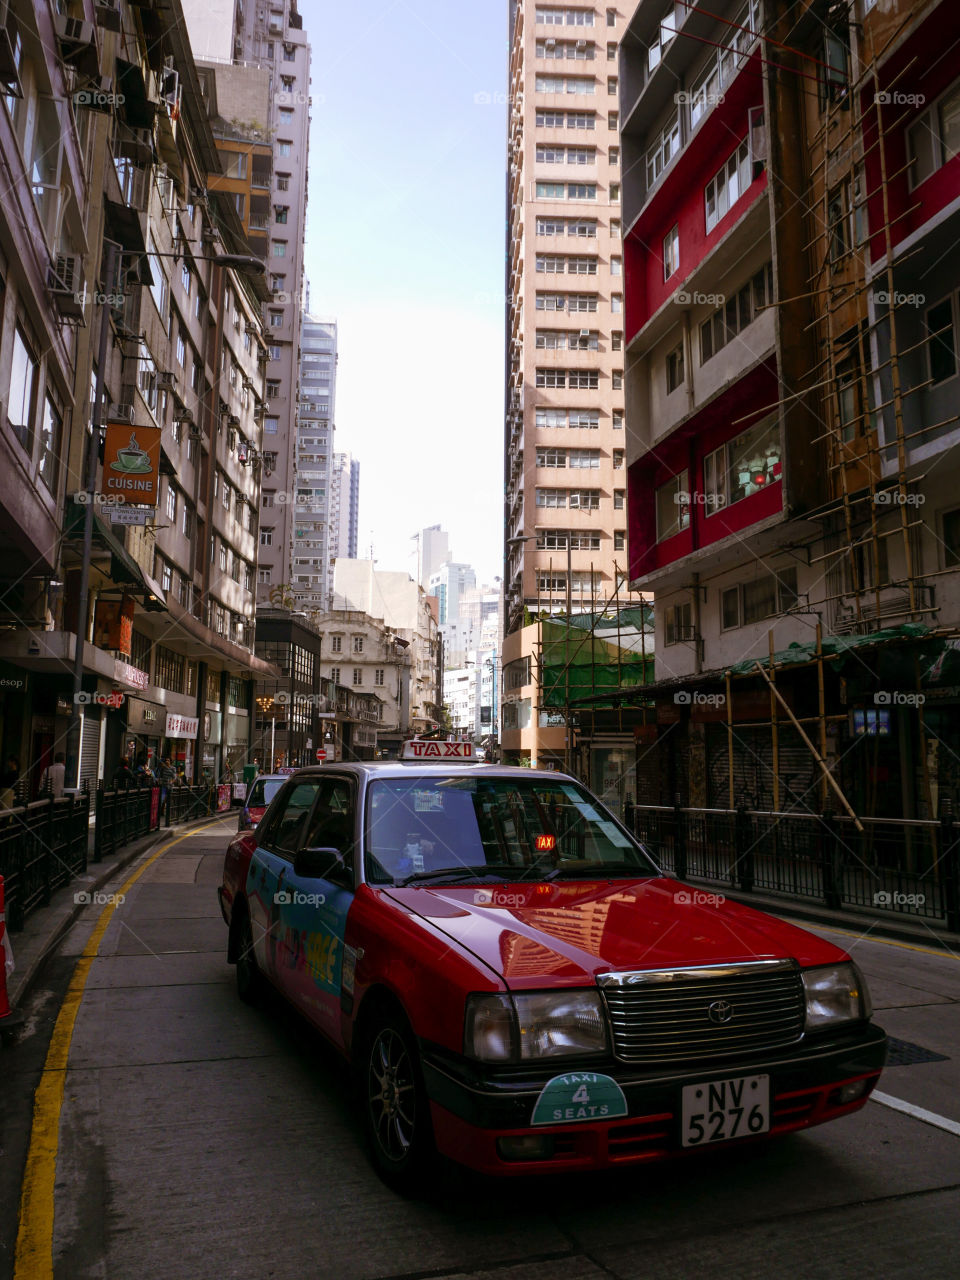 A shot of a red taxi in Hong Kong streets. A vintage feel to the photo on a bright winter day